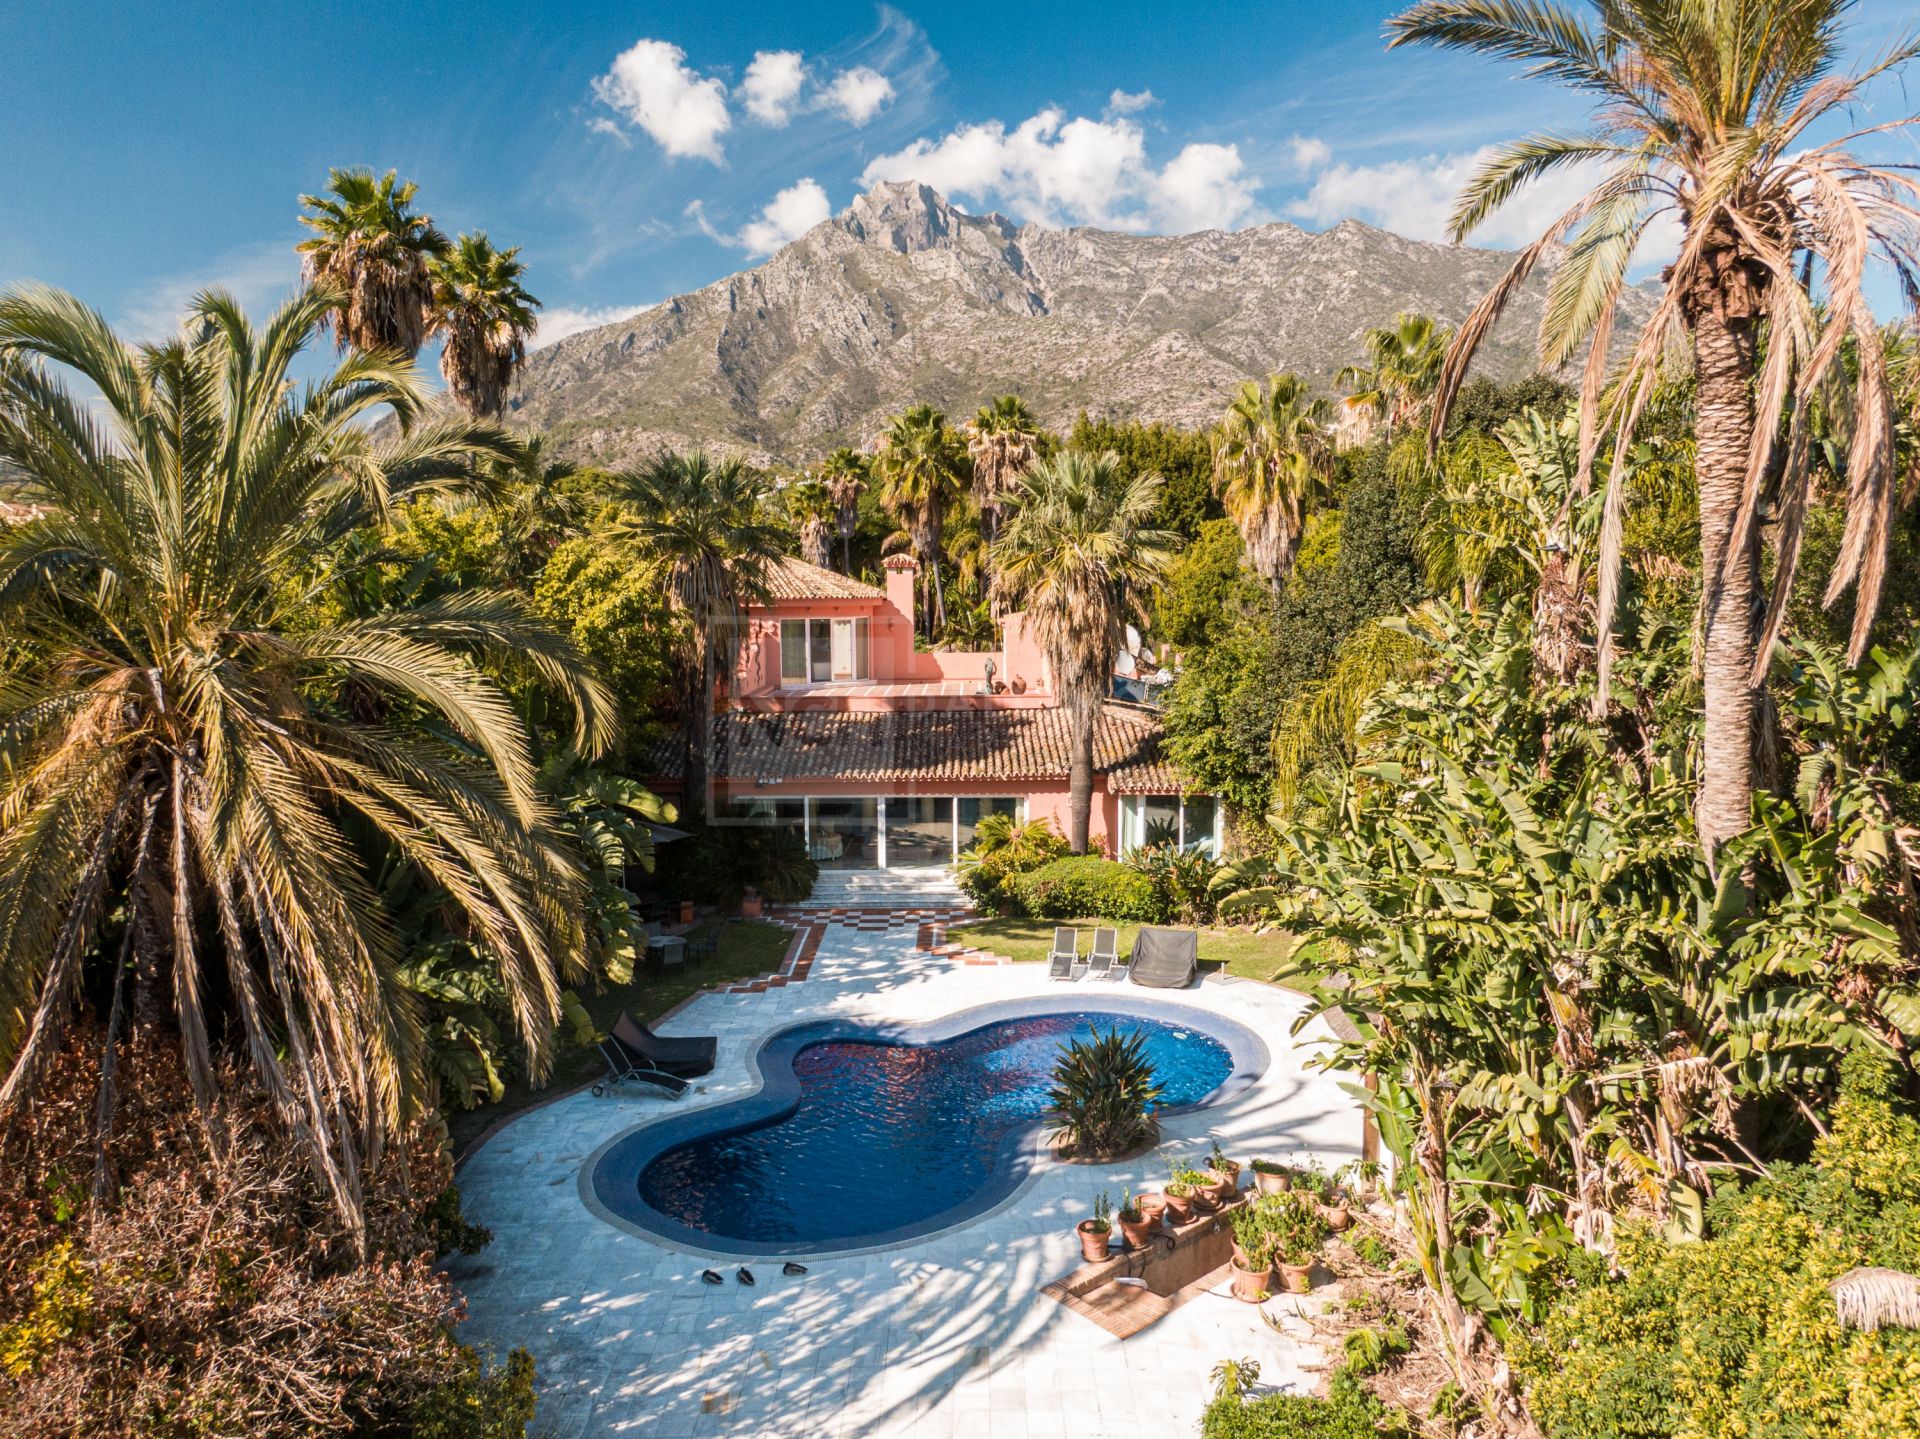 INVESTMENT OPPORTUNITY ON MARBELLA'S GOLDEN MILE